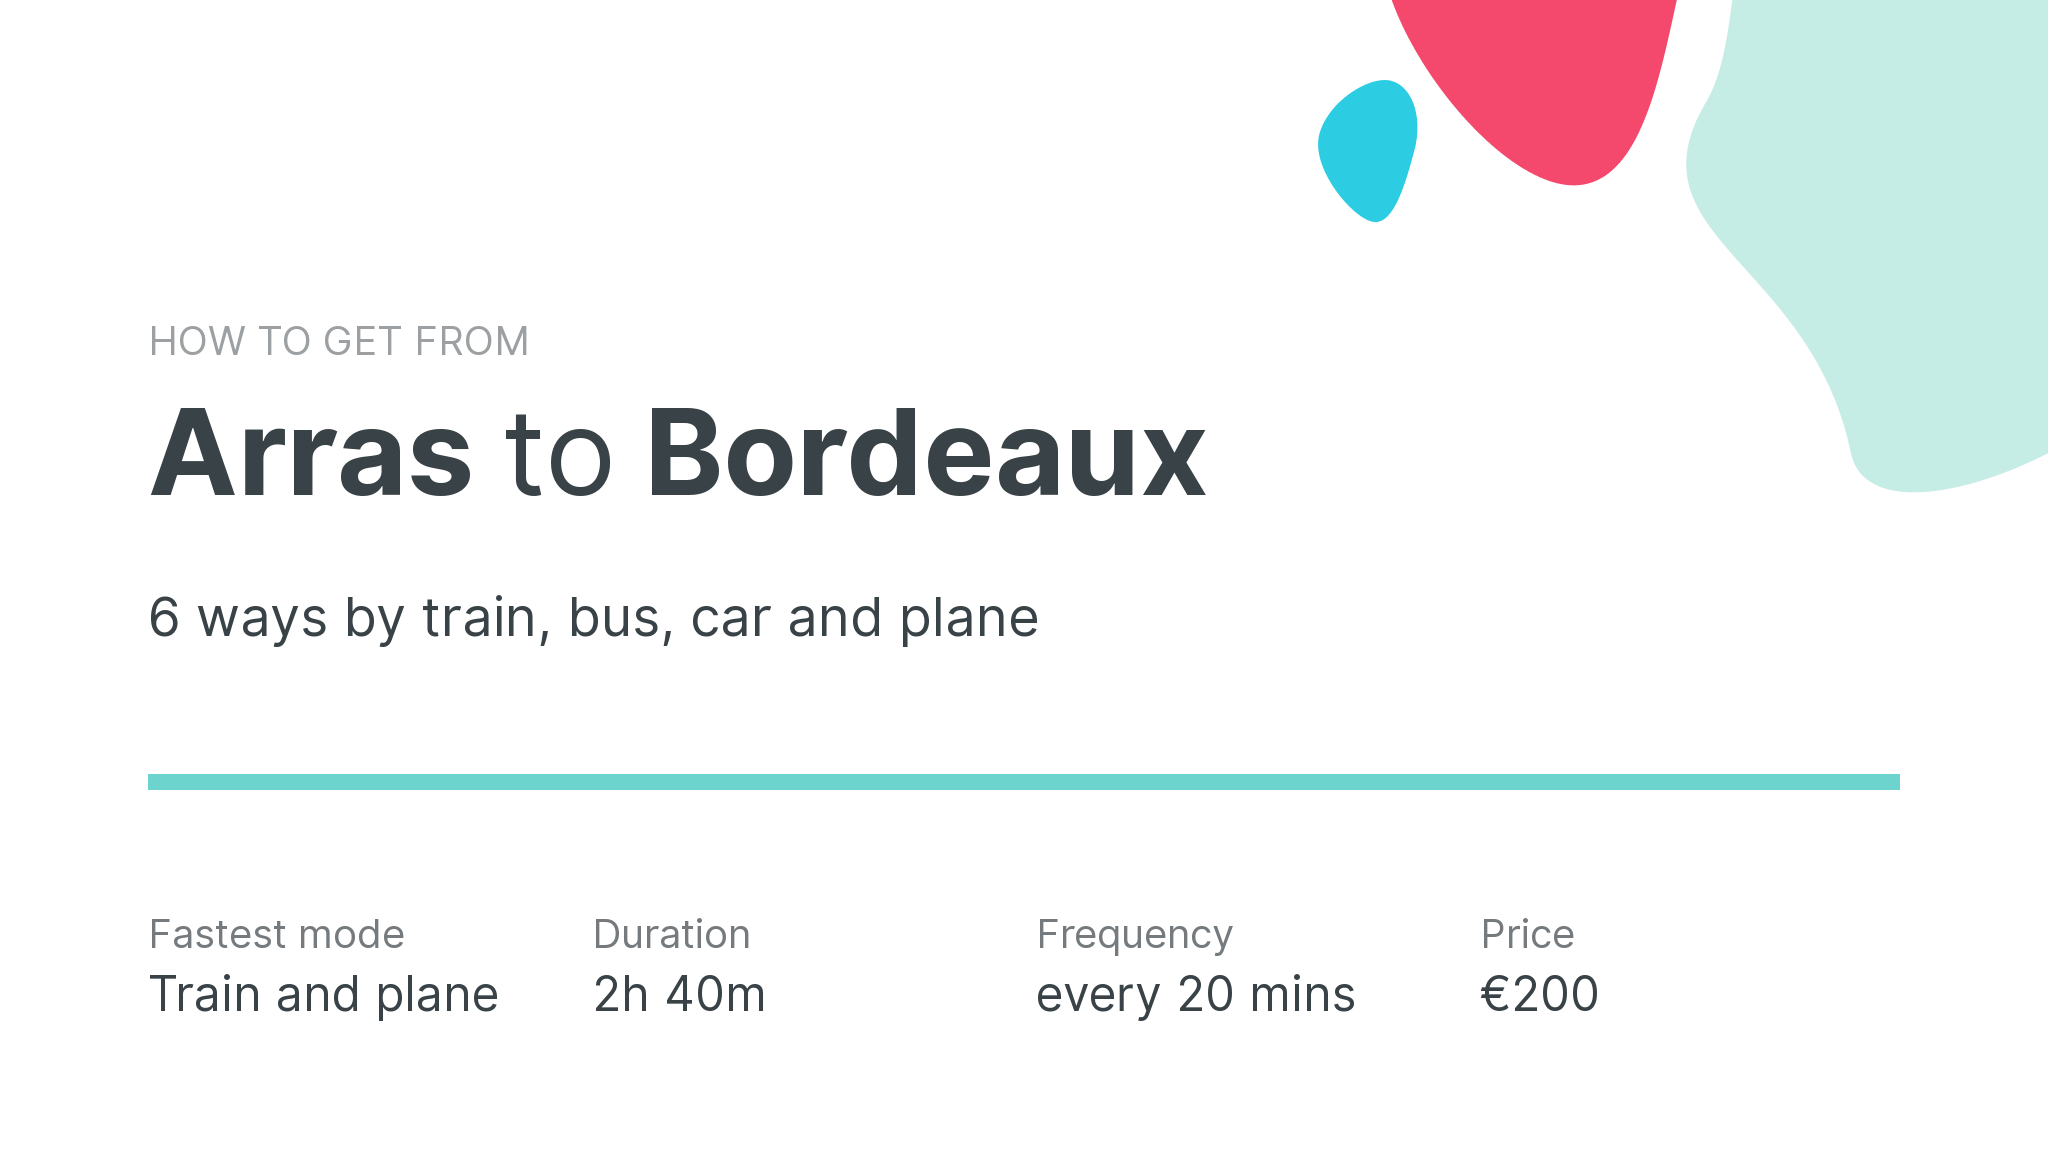 How do I get from Arras to Bordeaux